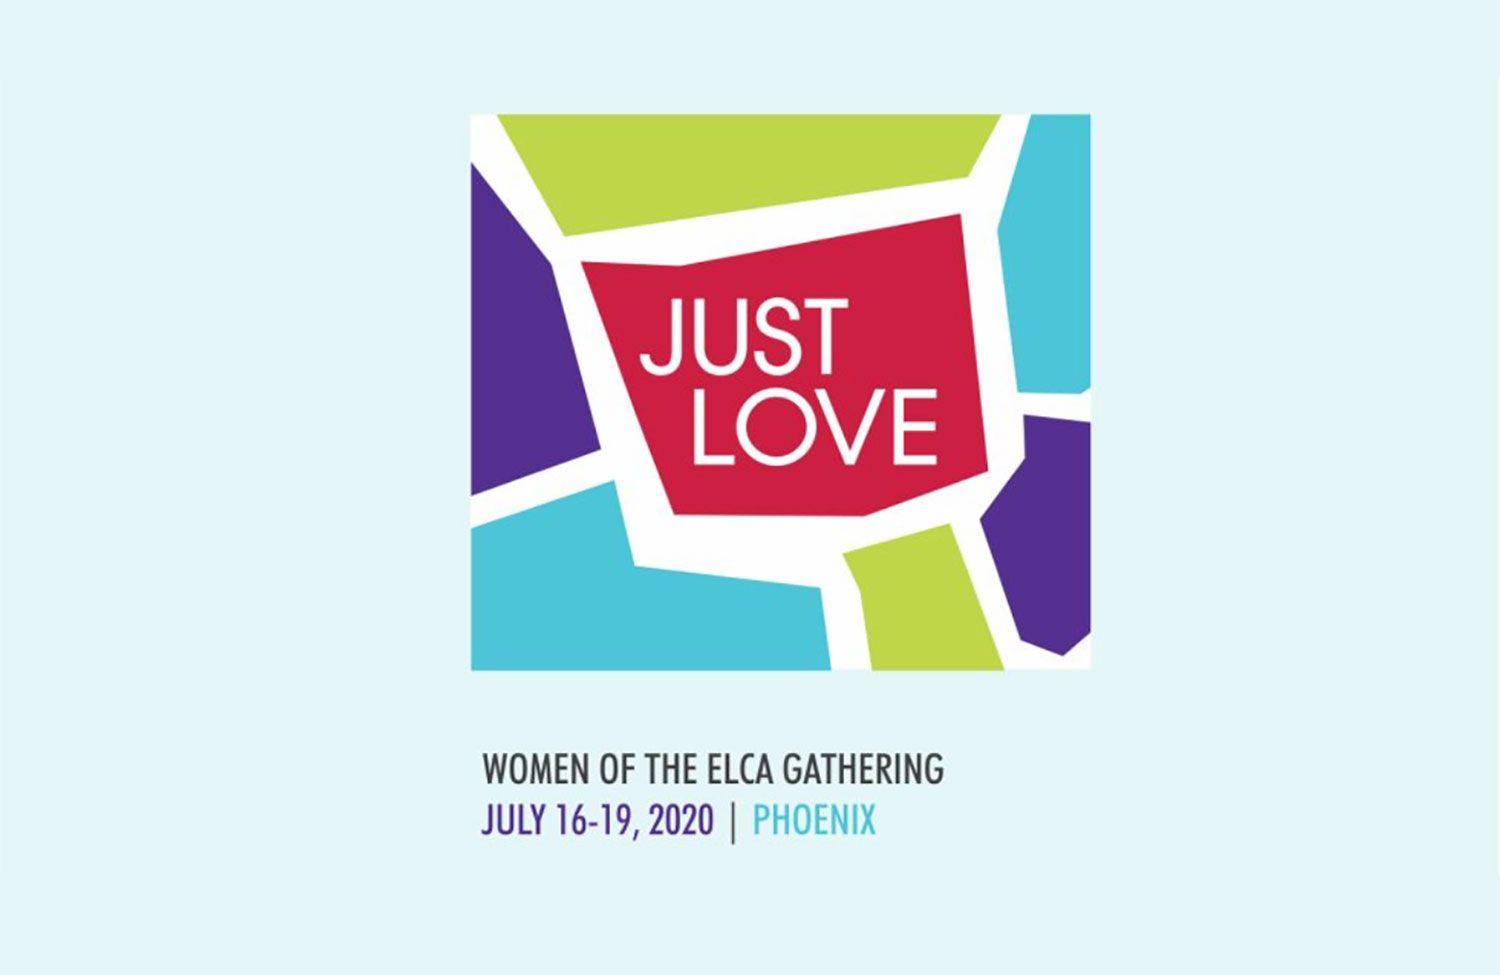 ELCA Logo - Just love” Gathering 2020 logo reminds we are part of one body ...